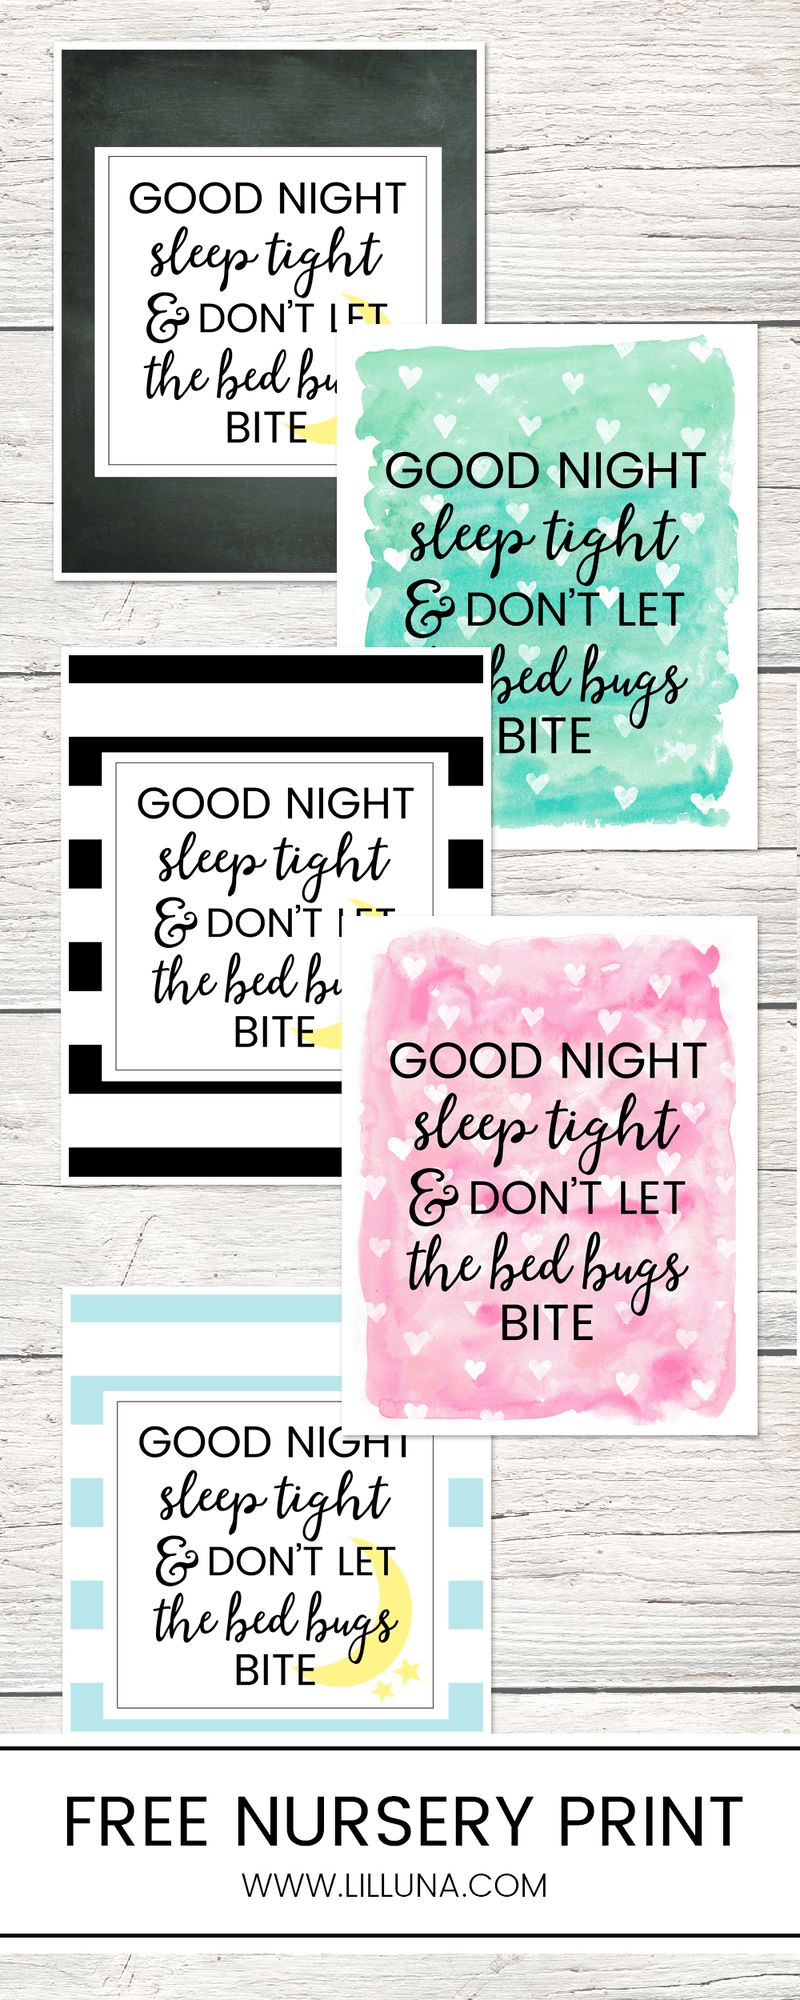 FREE Good night, sleep tight and don't let the bed bugs bite printables - perfect for the nursery!